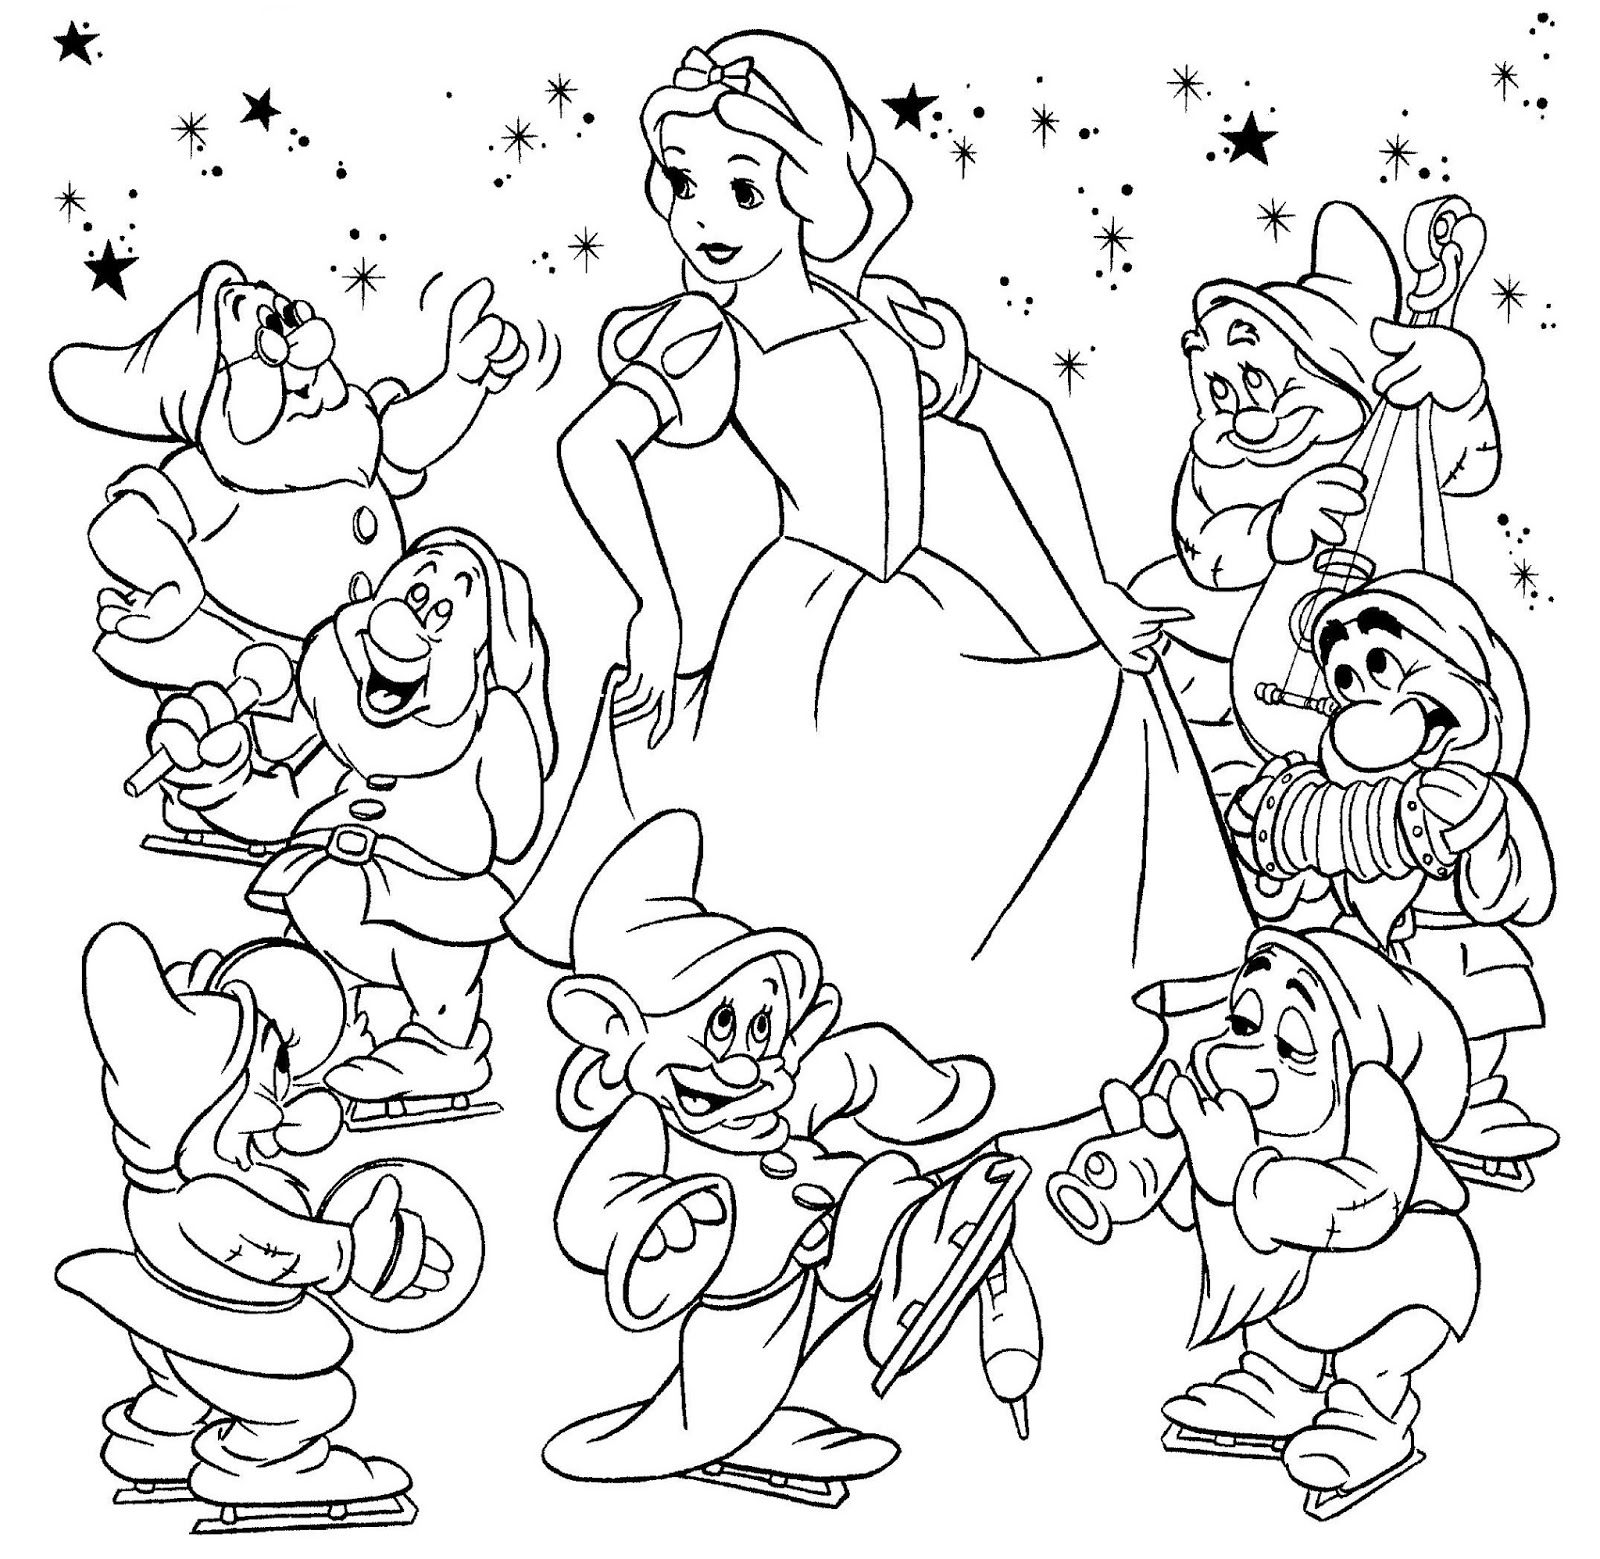 7 Dwarfs And Snow White coloring page